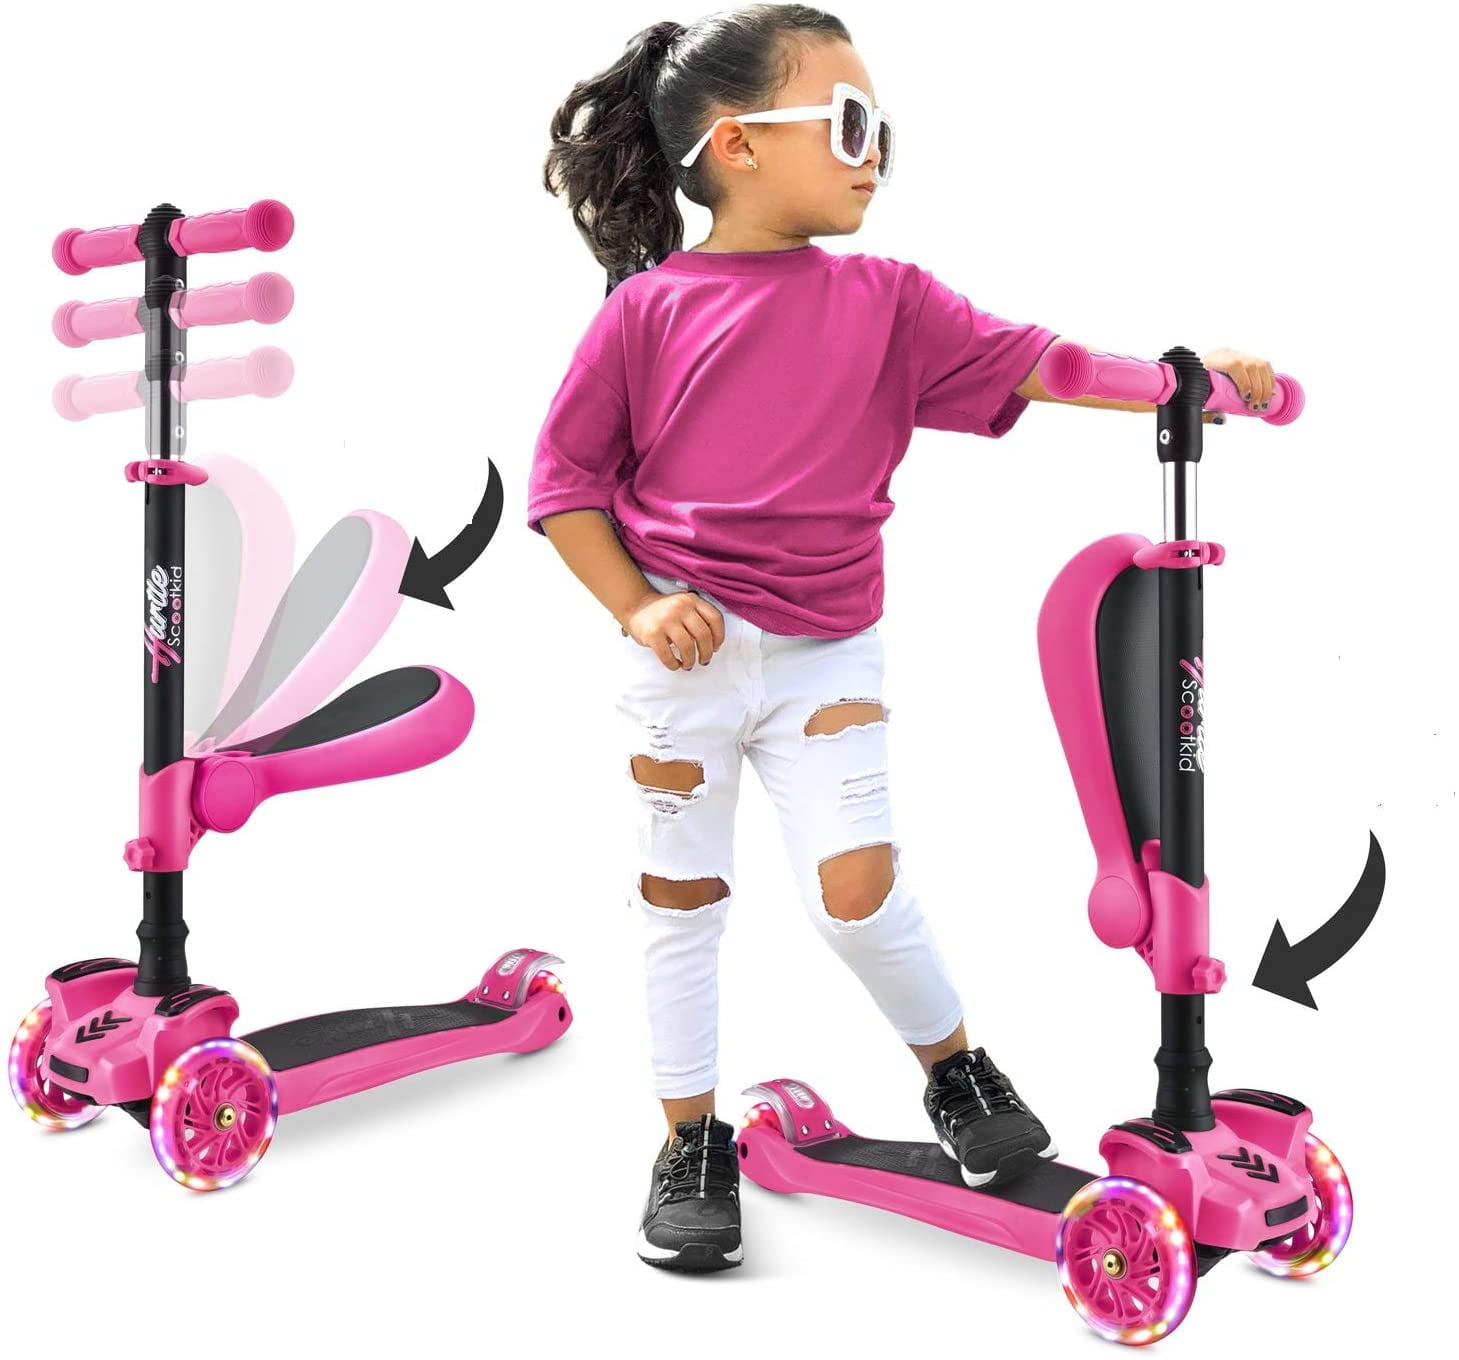 3 Wheel Adjustable LED Kick Scooter Deluxe Height T-bar Glider-Toddler Kids Pink 